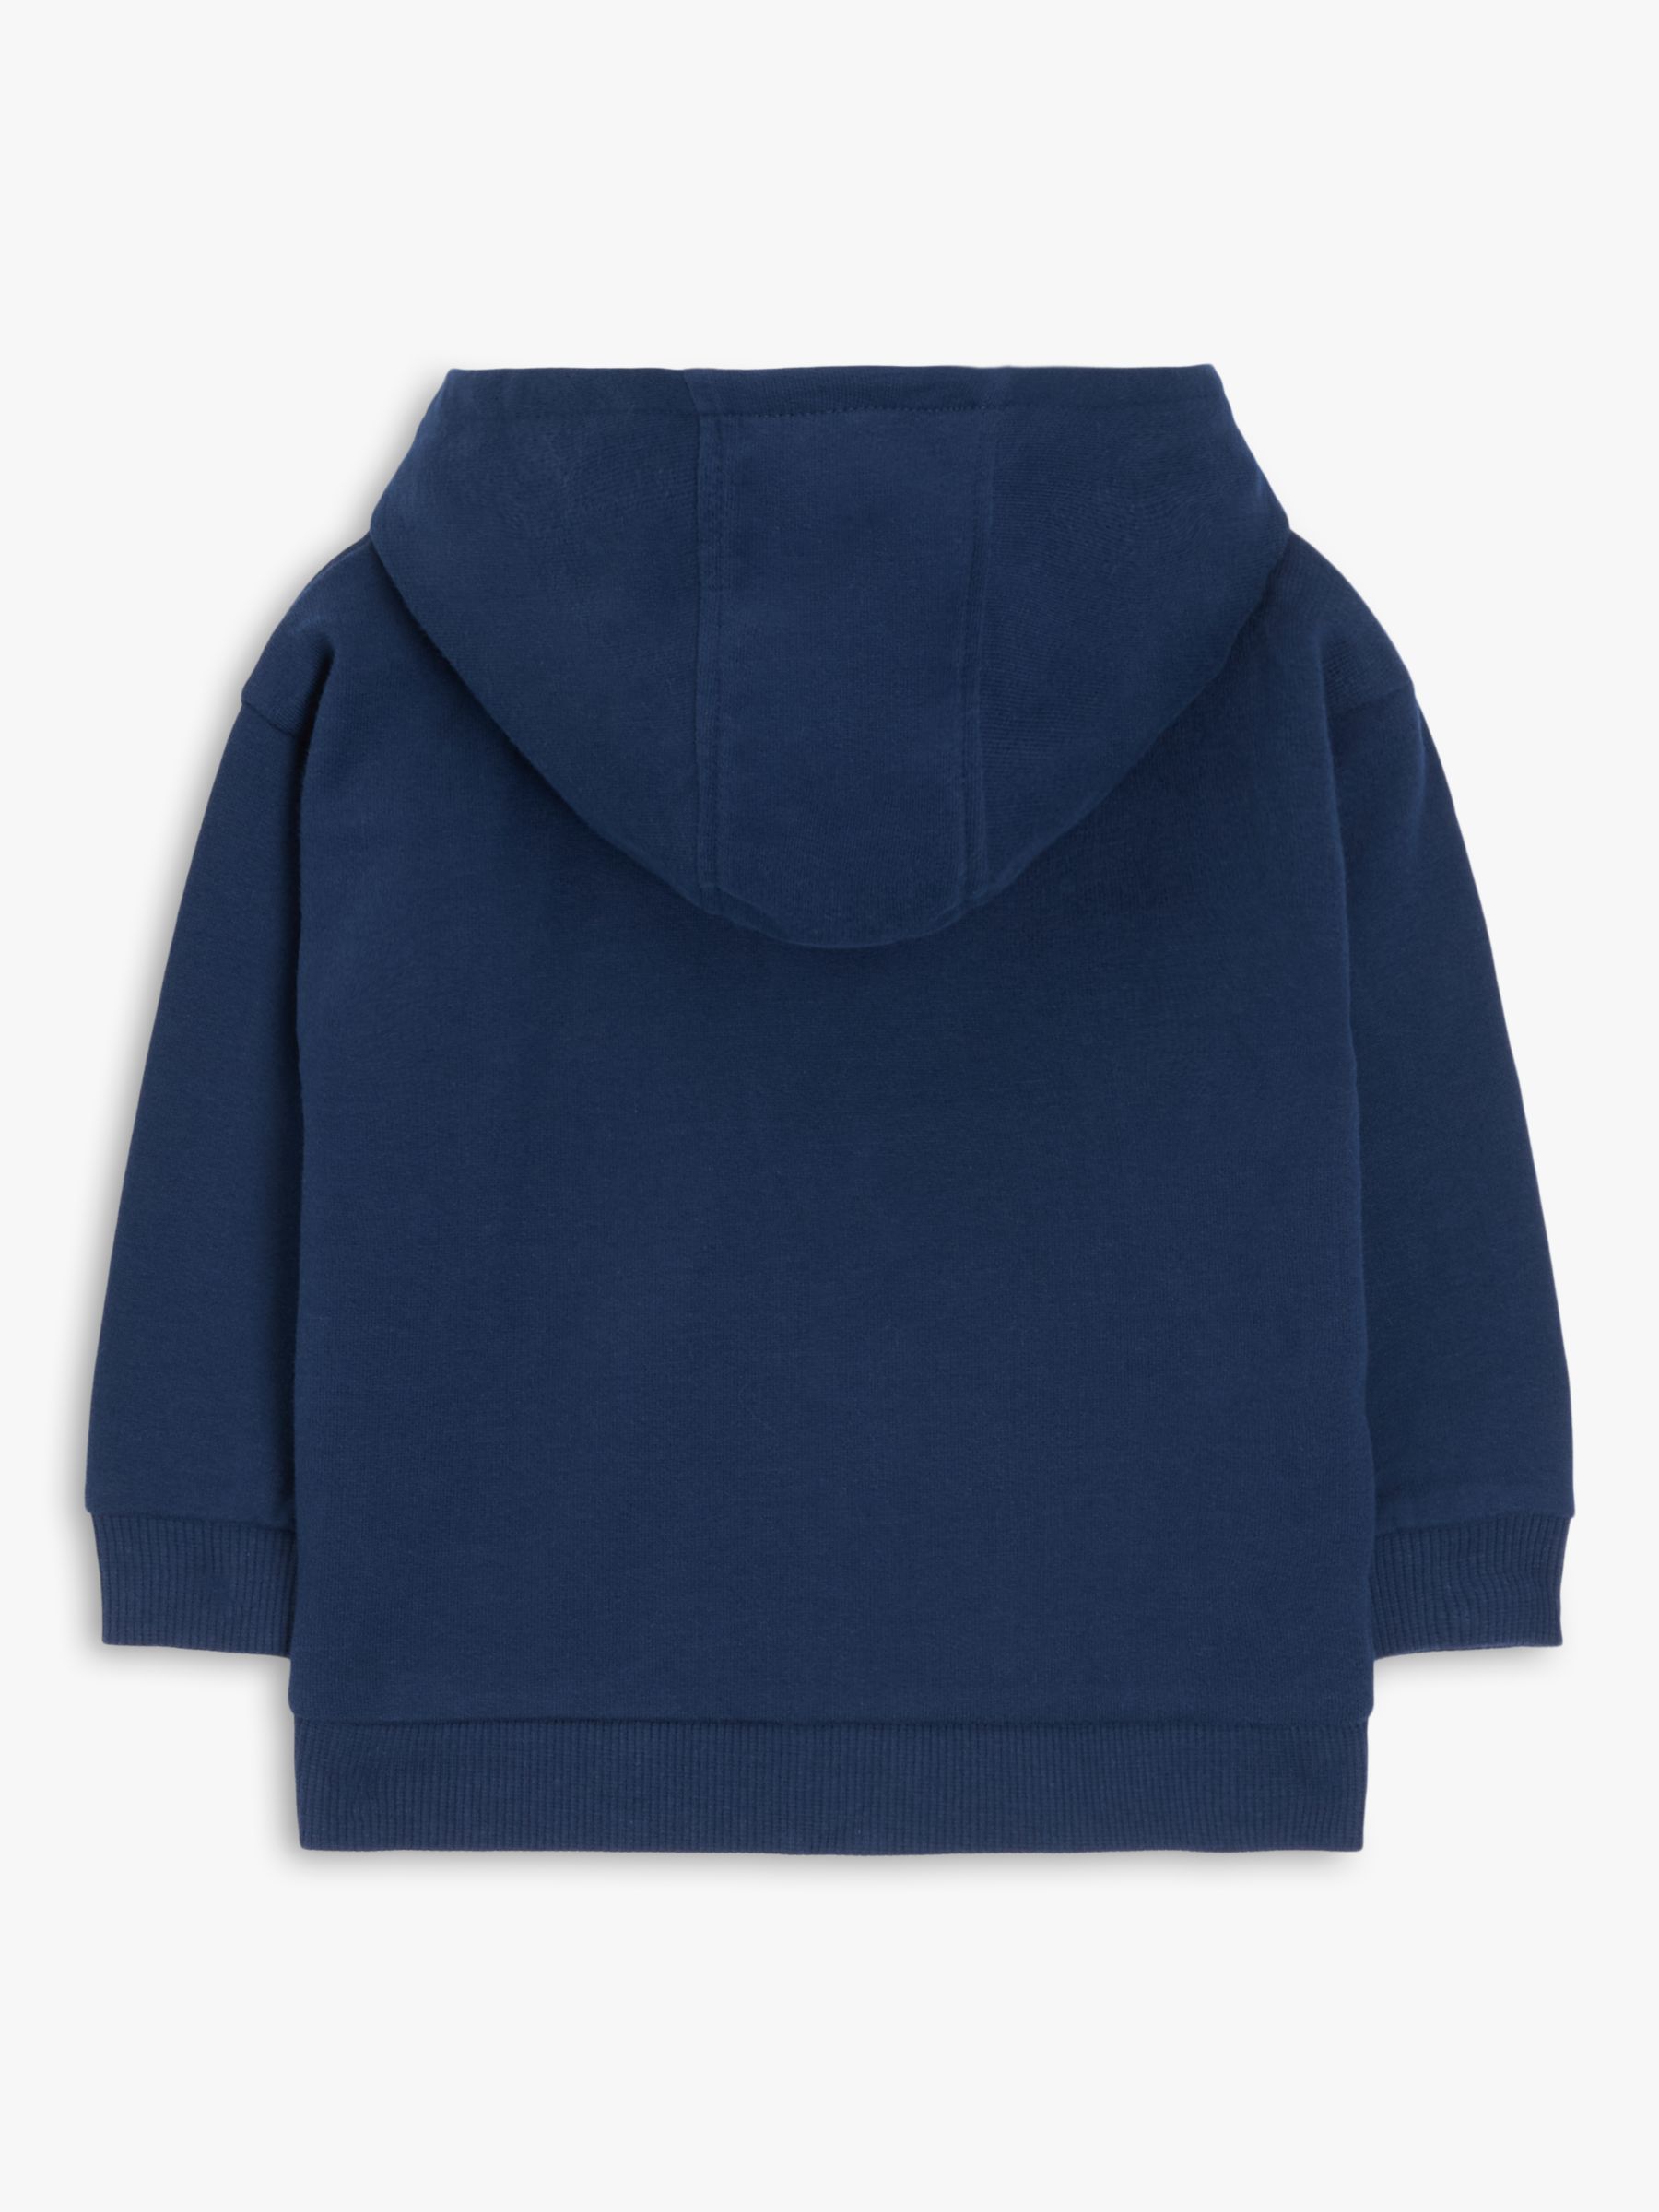 John Lewis ANYDAY Baby Zip-Up Lined Hoodie, Navy at John Lewis & Partners